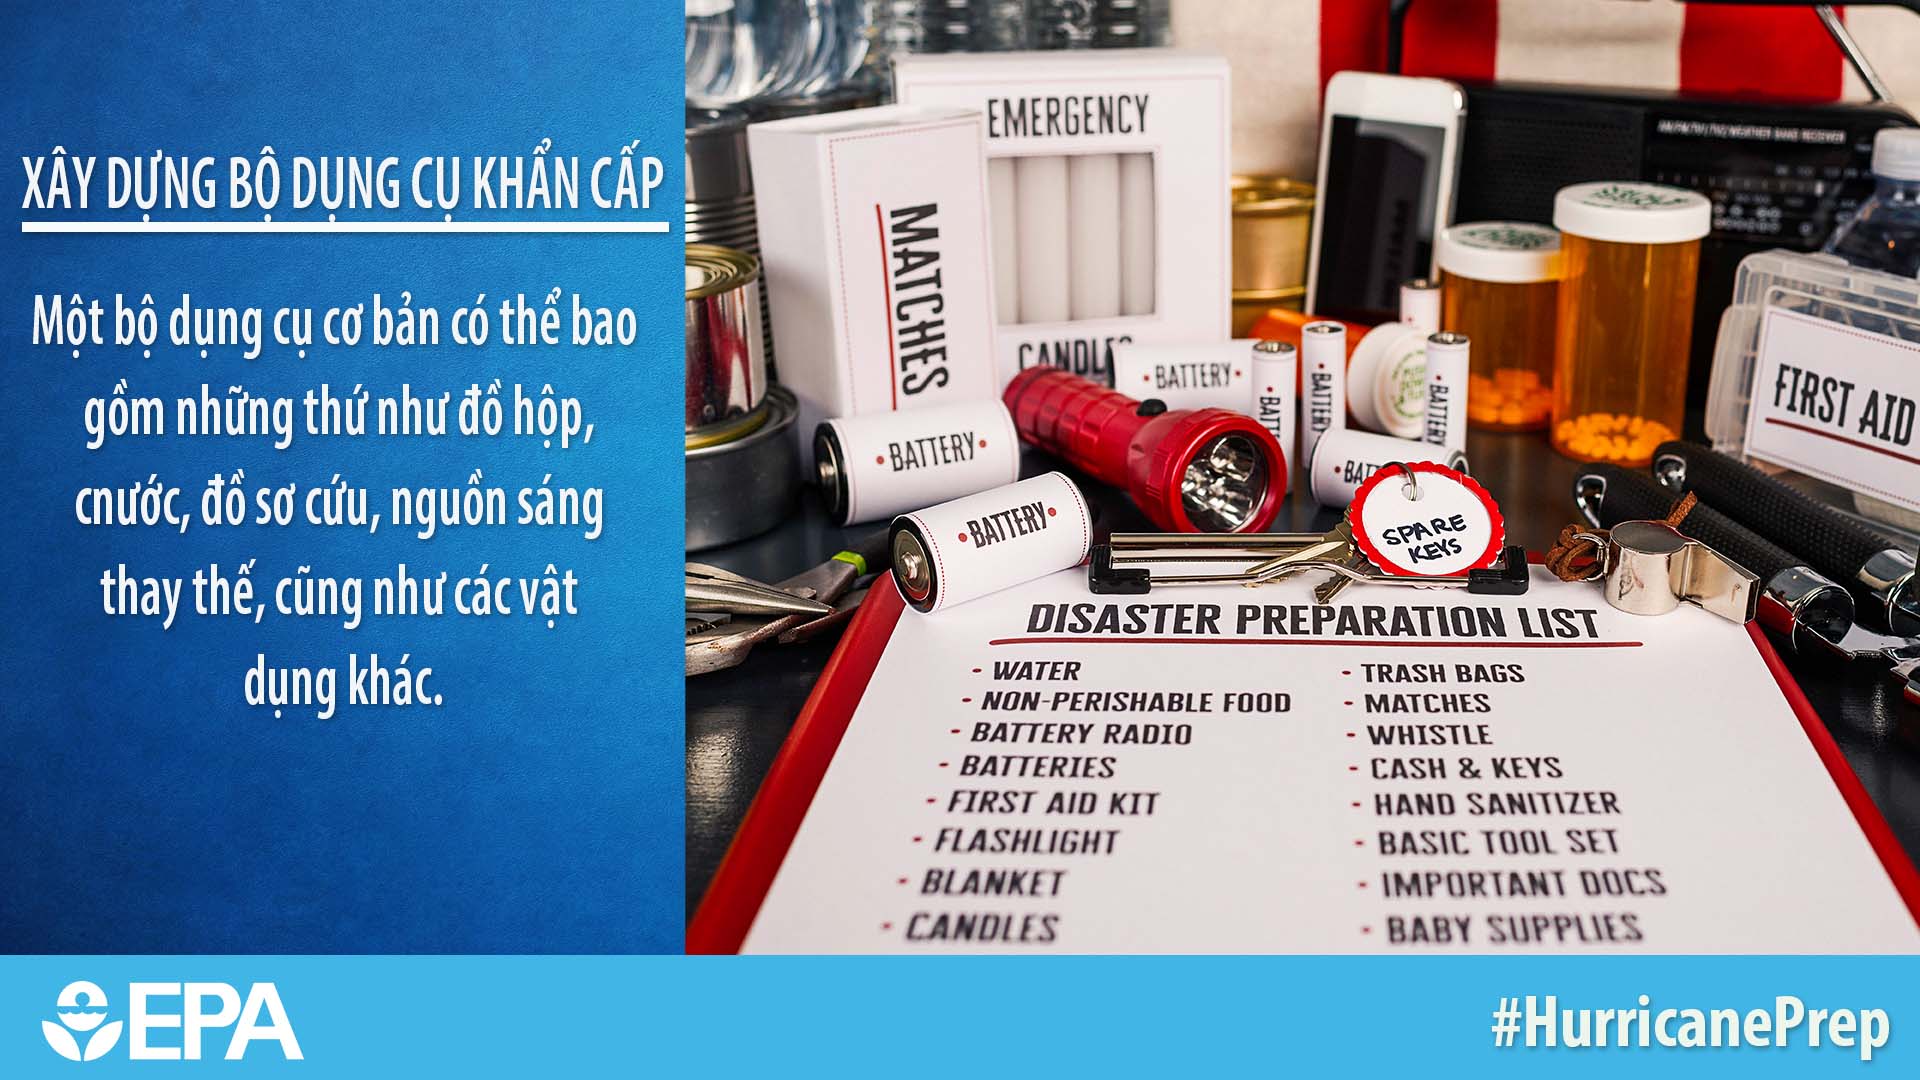 Text and photo of key items to build an emergency kit